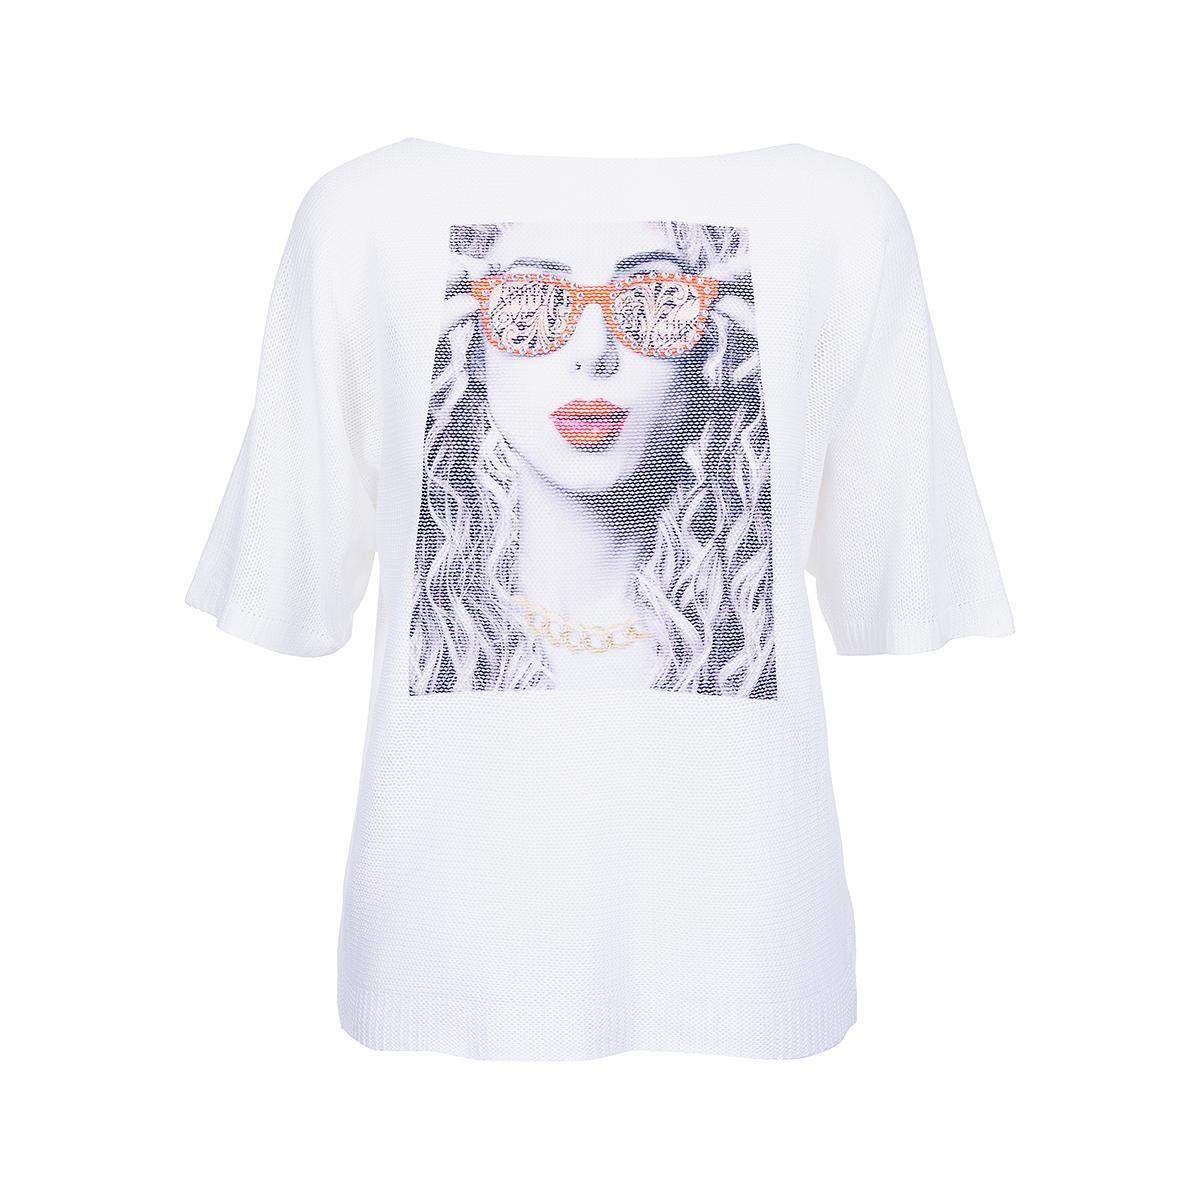  Women's Lady With Glasses Short Sleeve Sweater